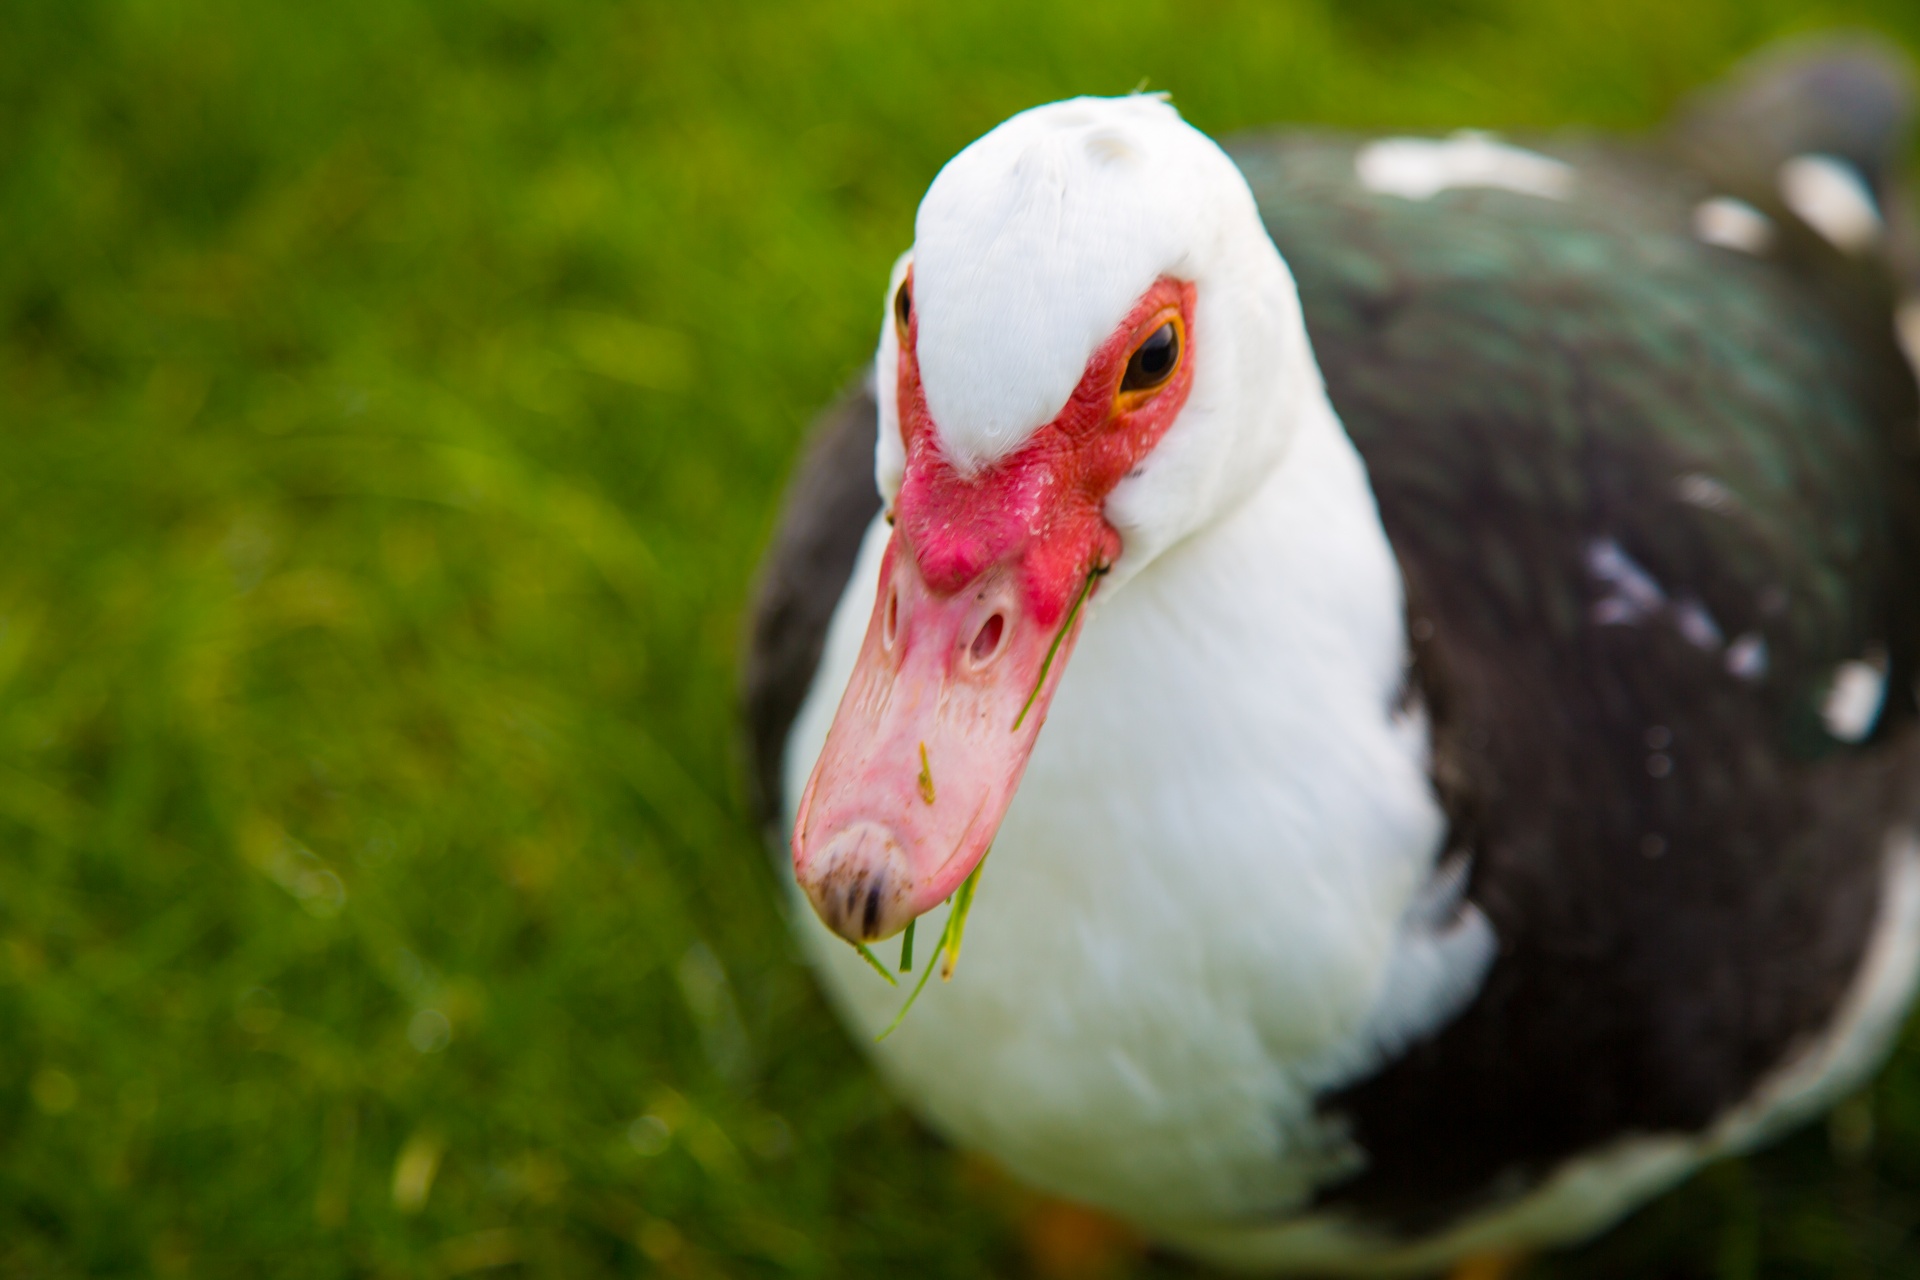 Muscovy duck with white feathers and red wattle- Cairina moschata